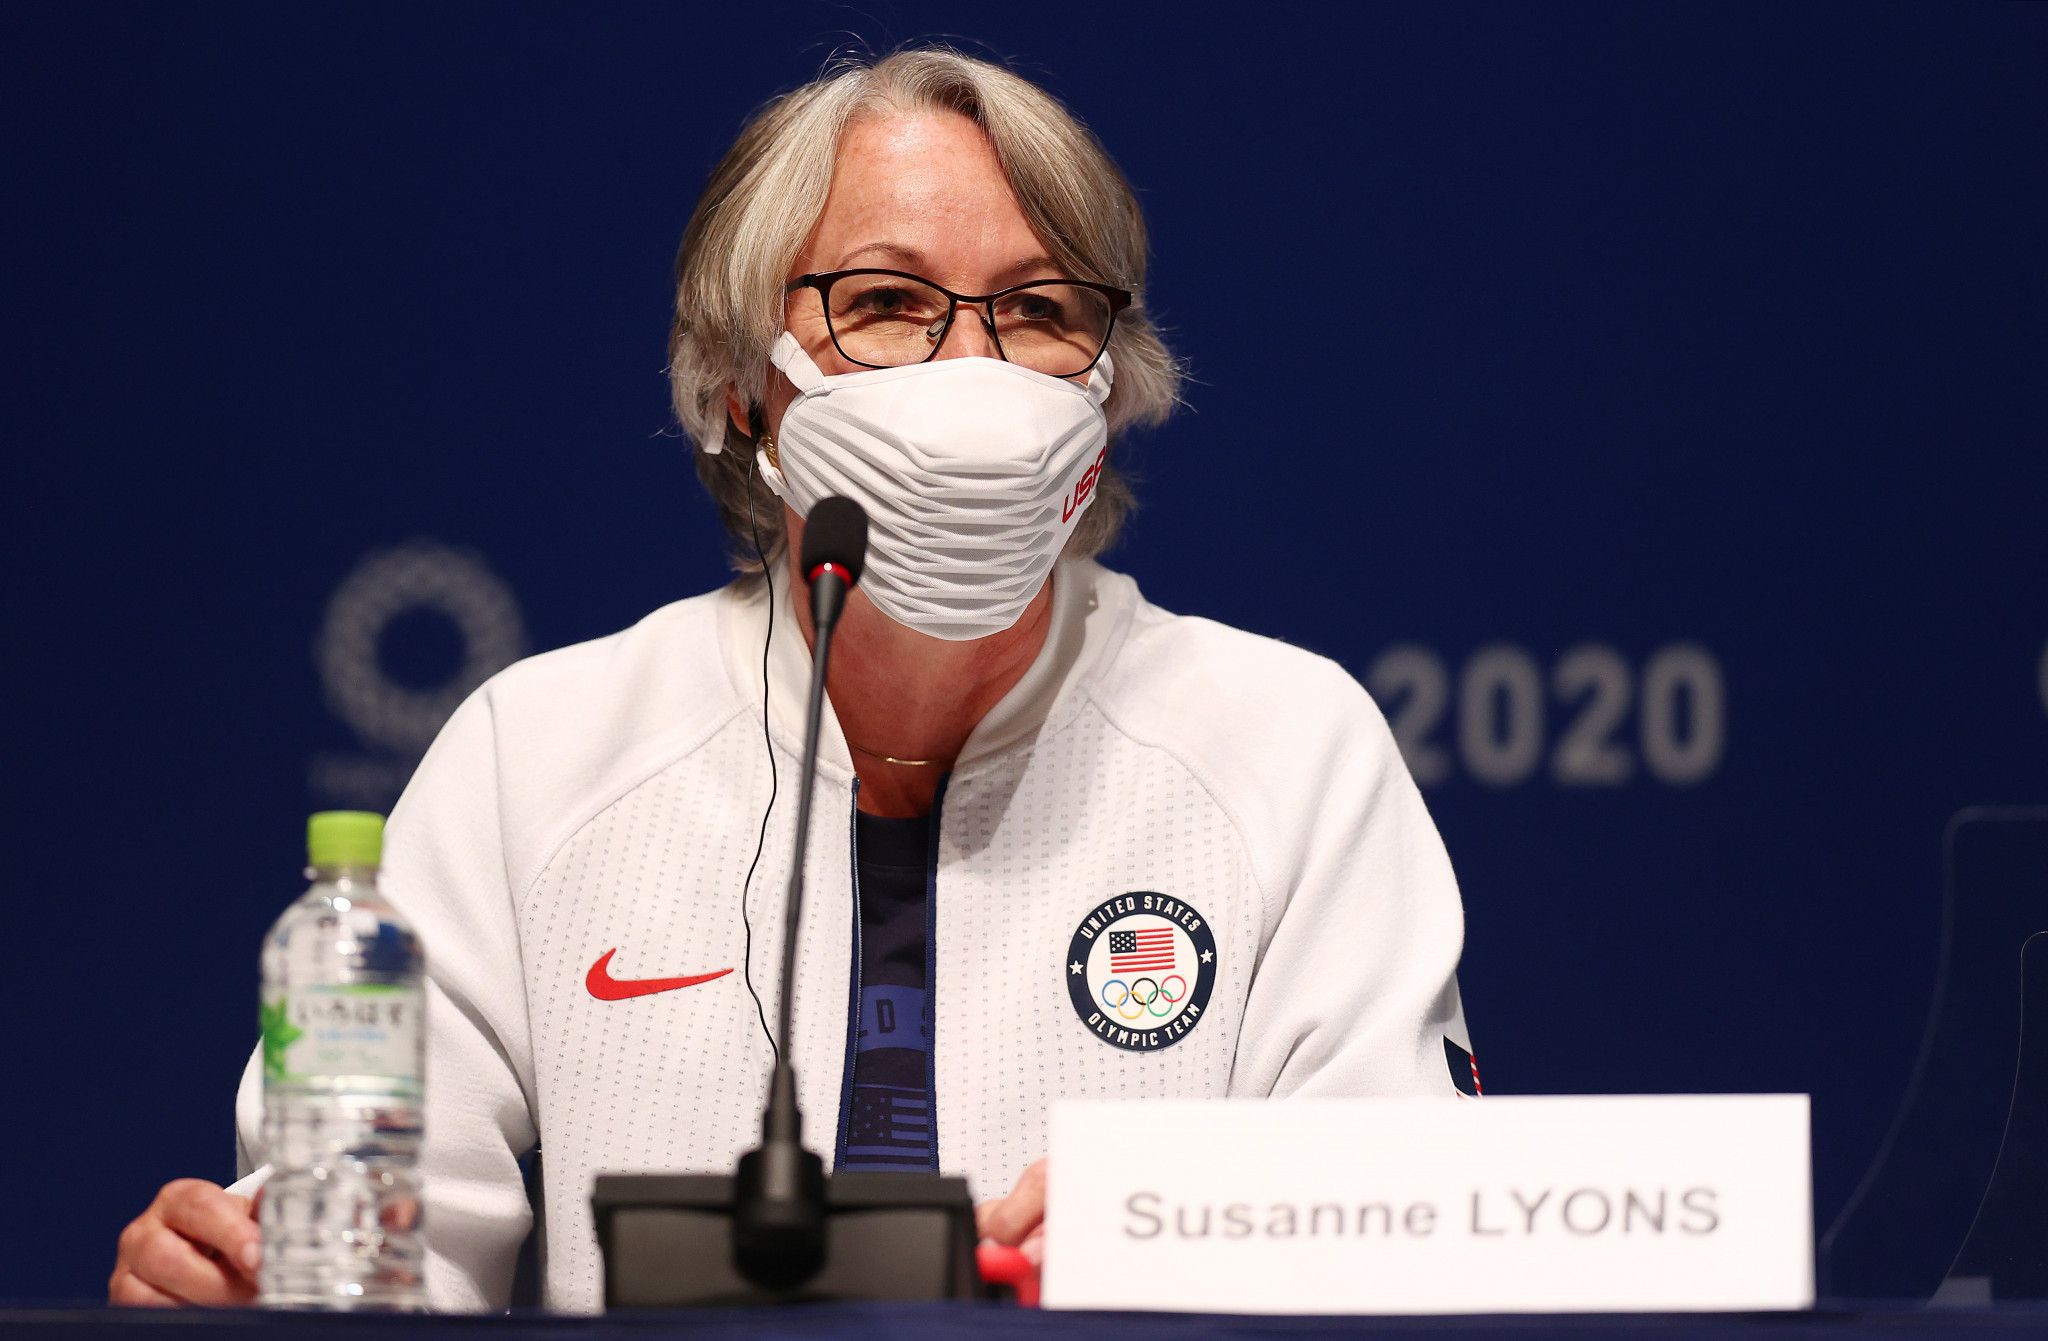 Susanne Lyons suggested that the IOC is looking at a "pathway" for Russia's return to international sport ©Getty Images